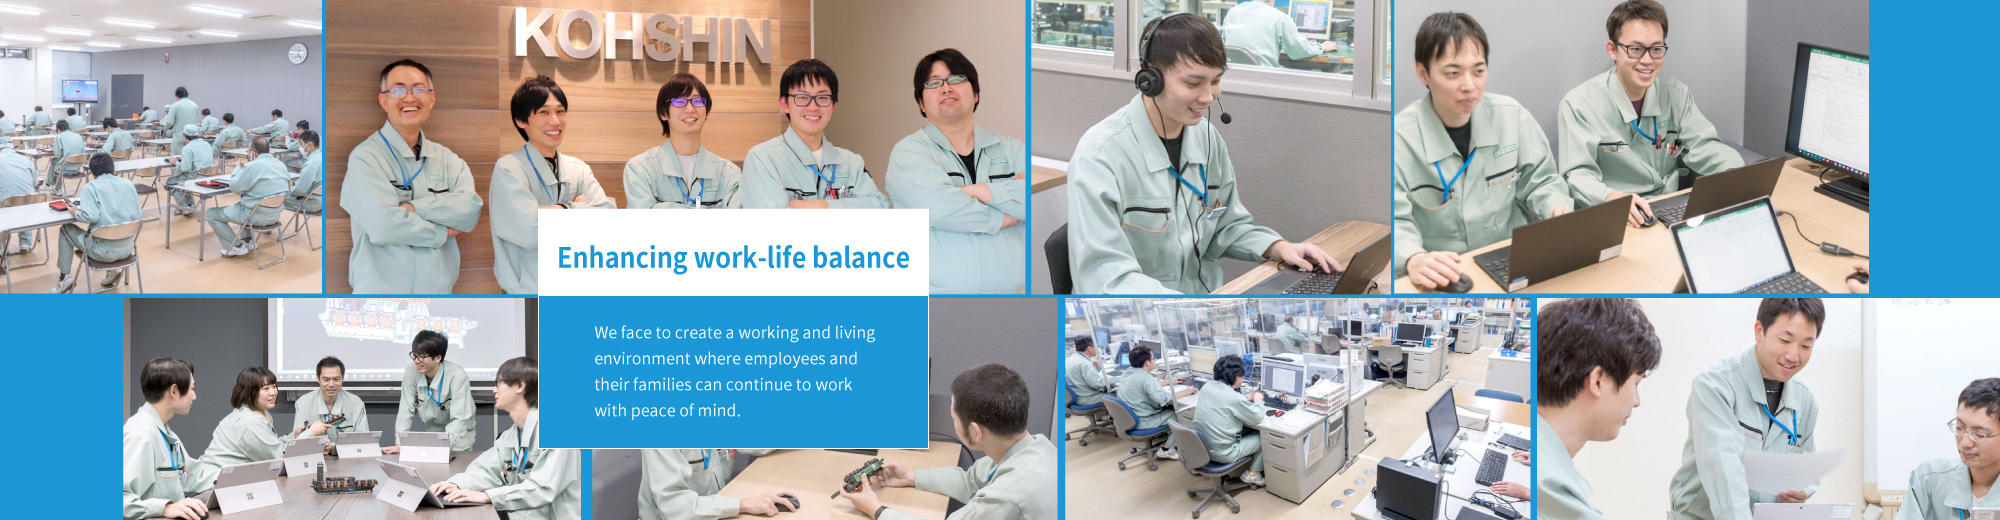 Enhancing work-life balance We face to create a working and living environment where employees and their families can continue to work with peace of mind.